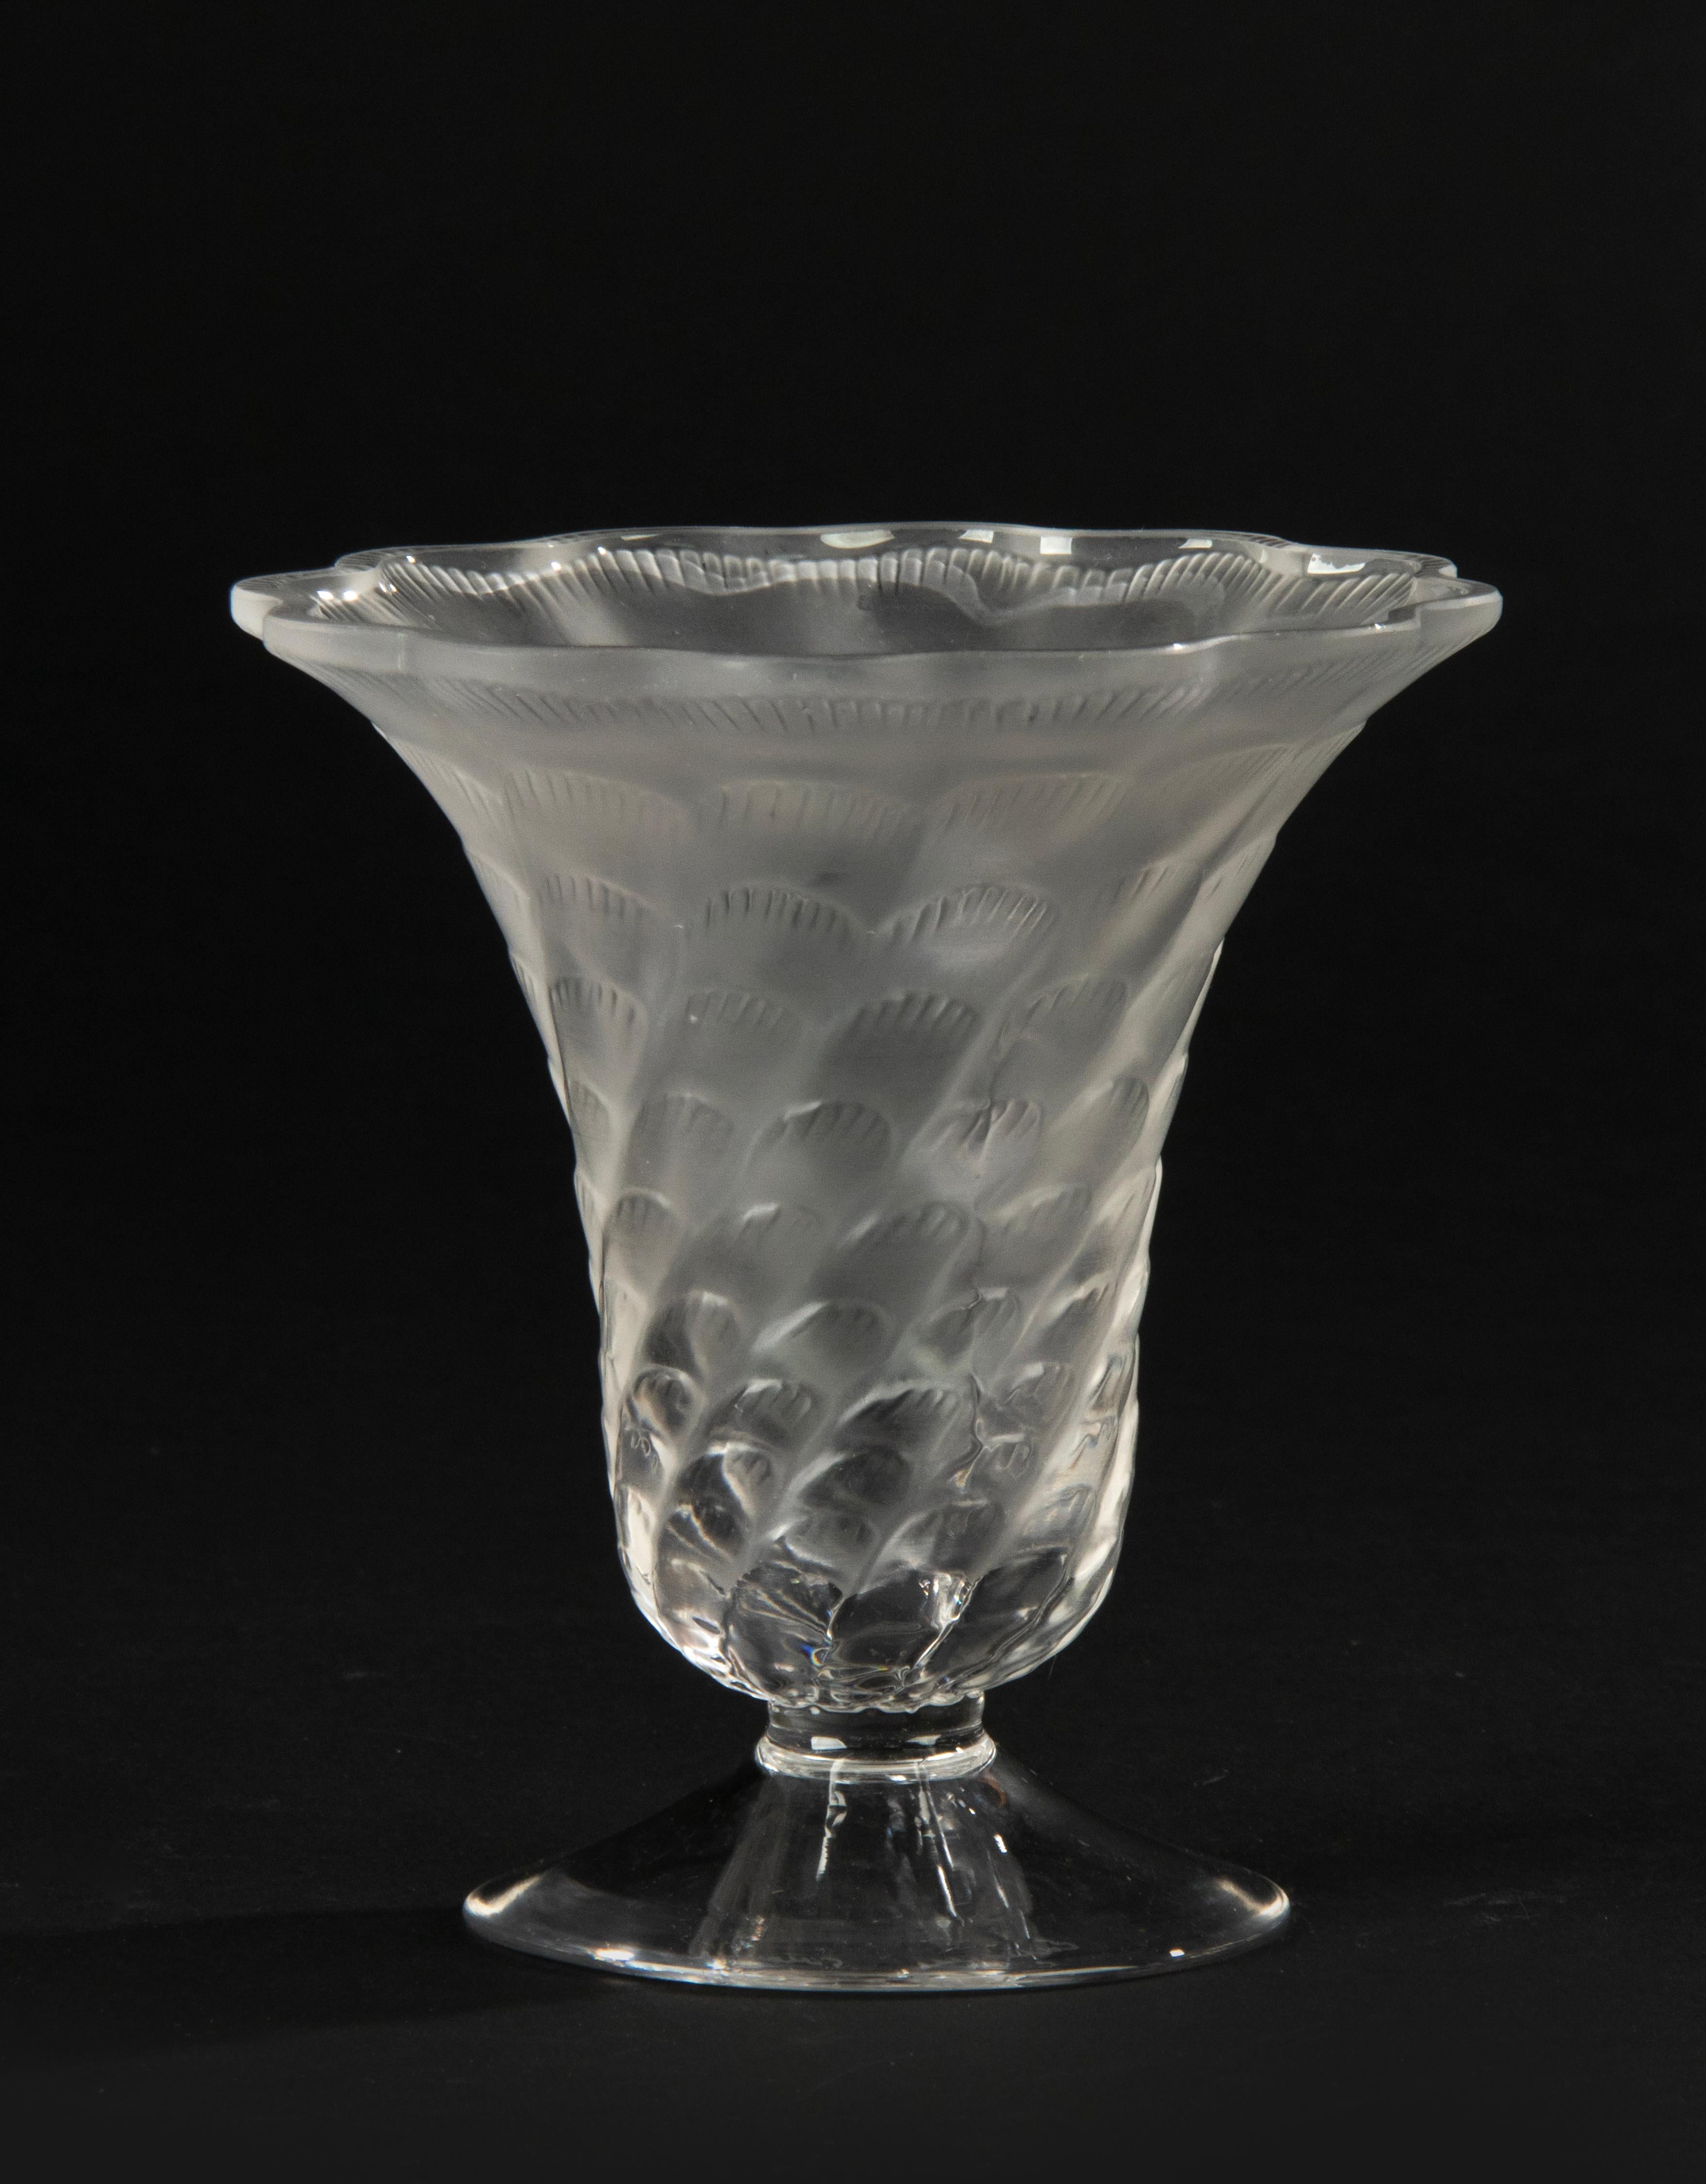 A beautiful little vase, made by the French maker Lalique. Beautiful relief decorations, satin-finished crystal. Marked on the bottom.
The vase is in very good condition.

